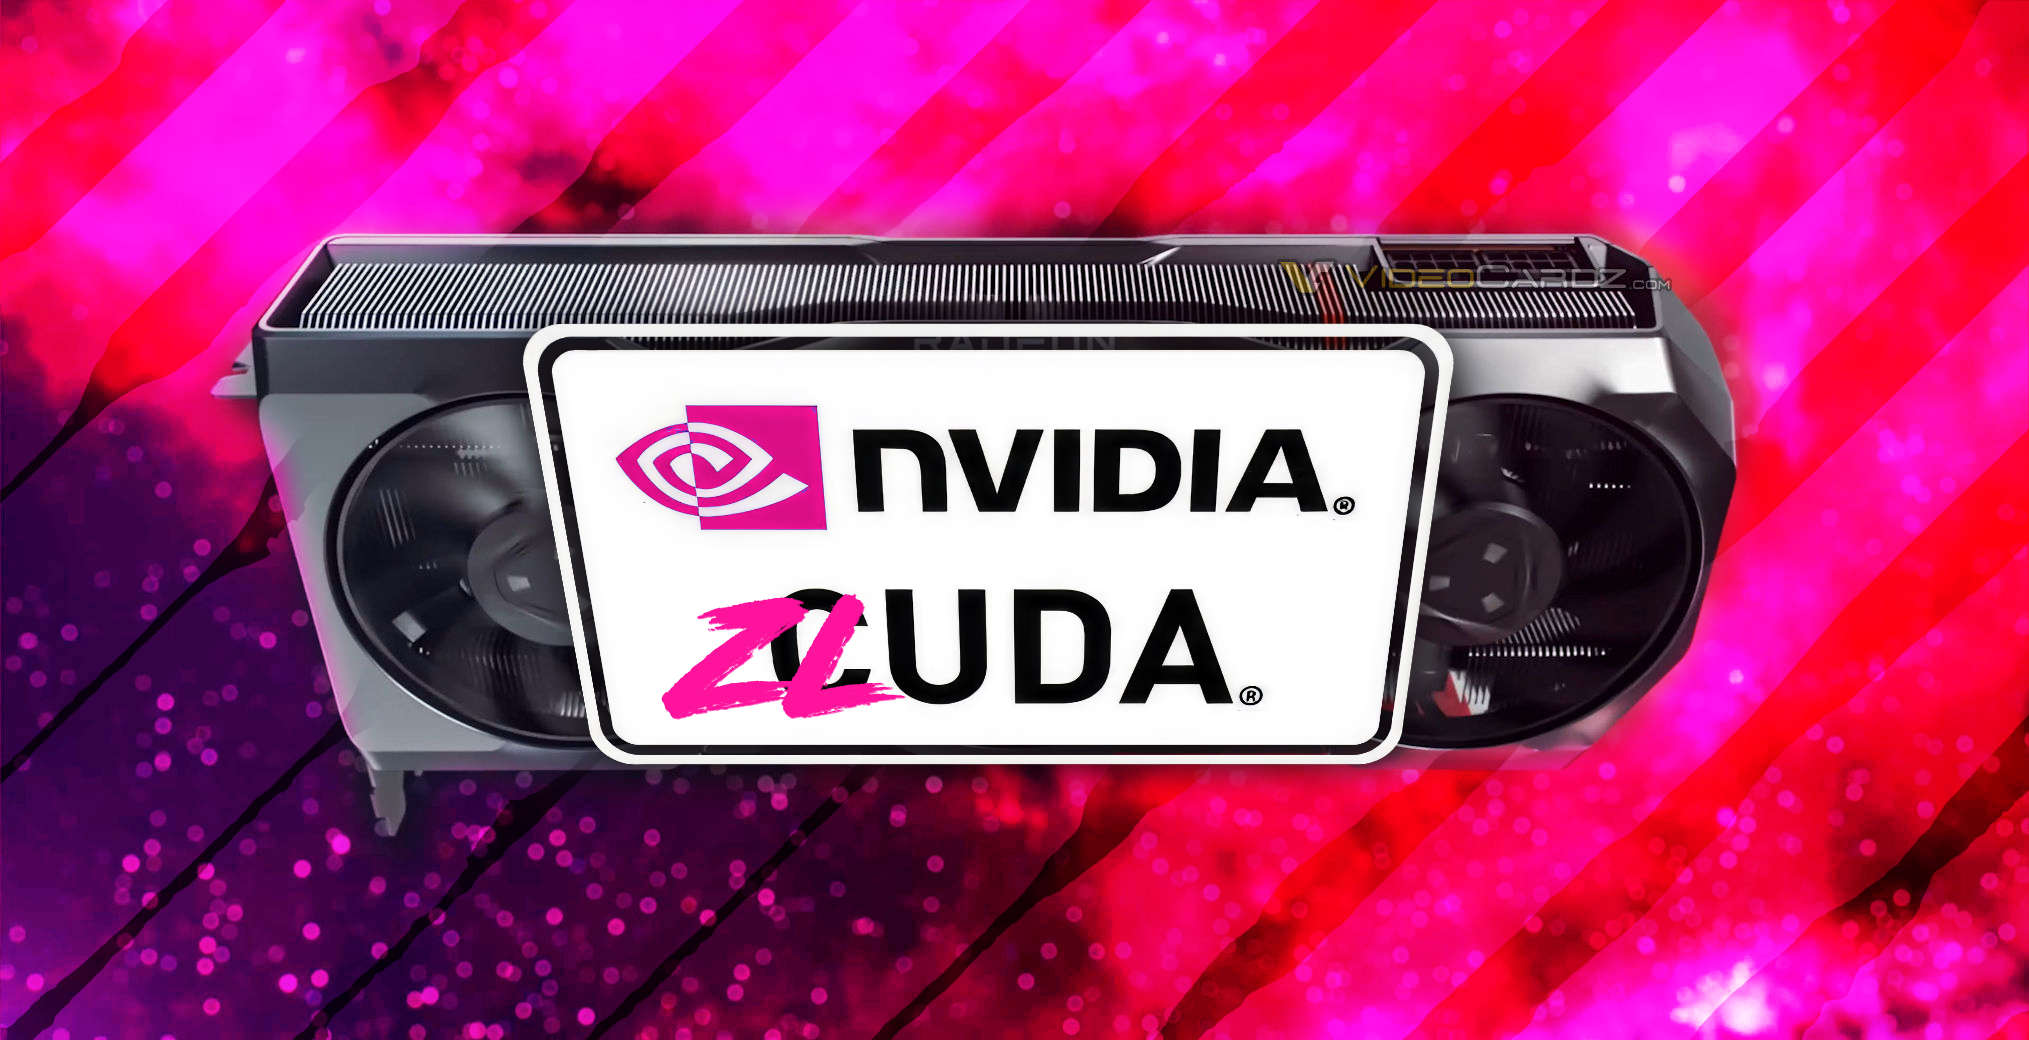 Breaking Barriers: ZLUDA Ensures Seamless Integration of NVIDIA CUDA Apps on AMD GPUs without Modifications